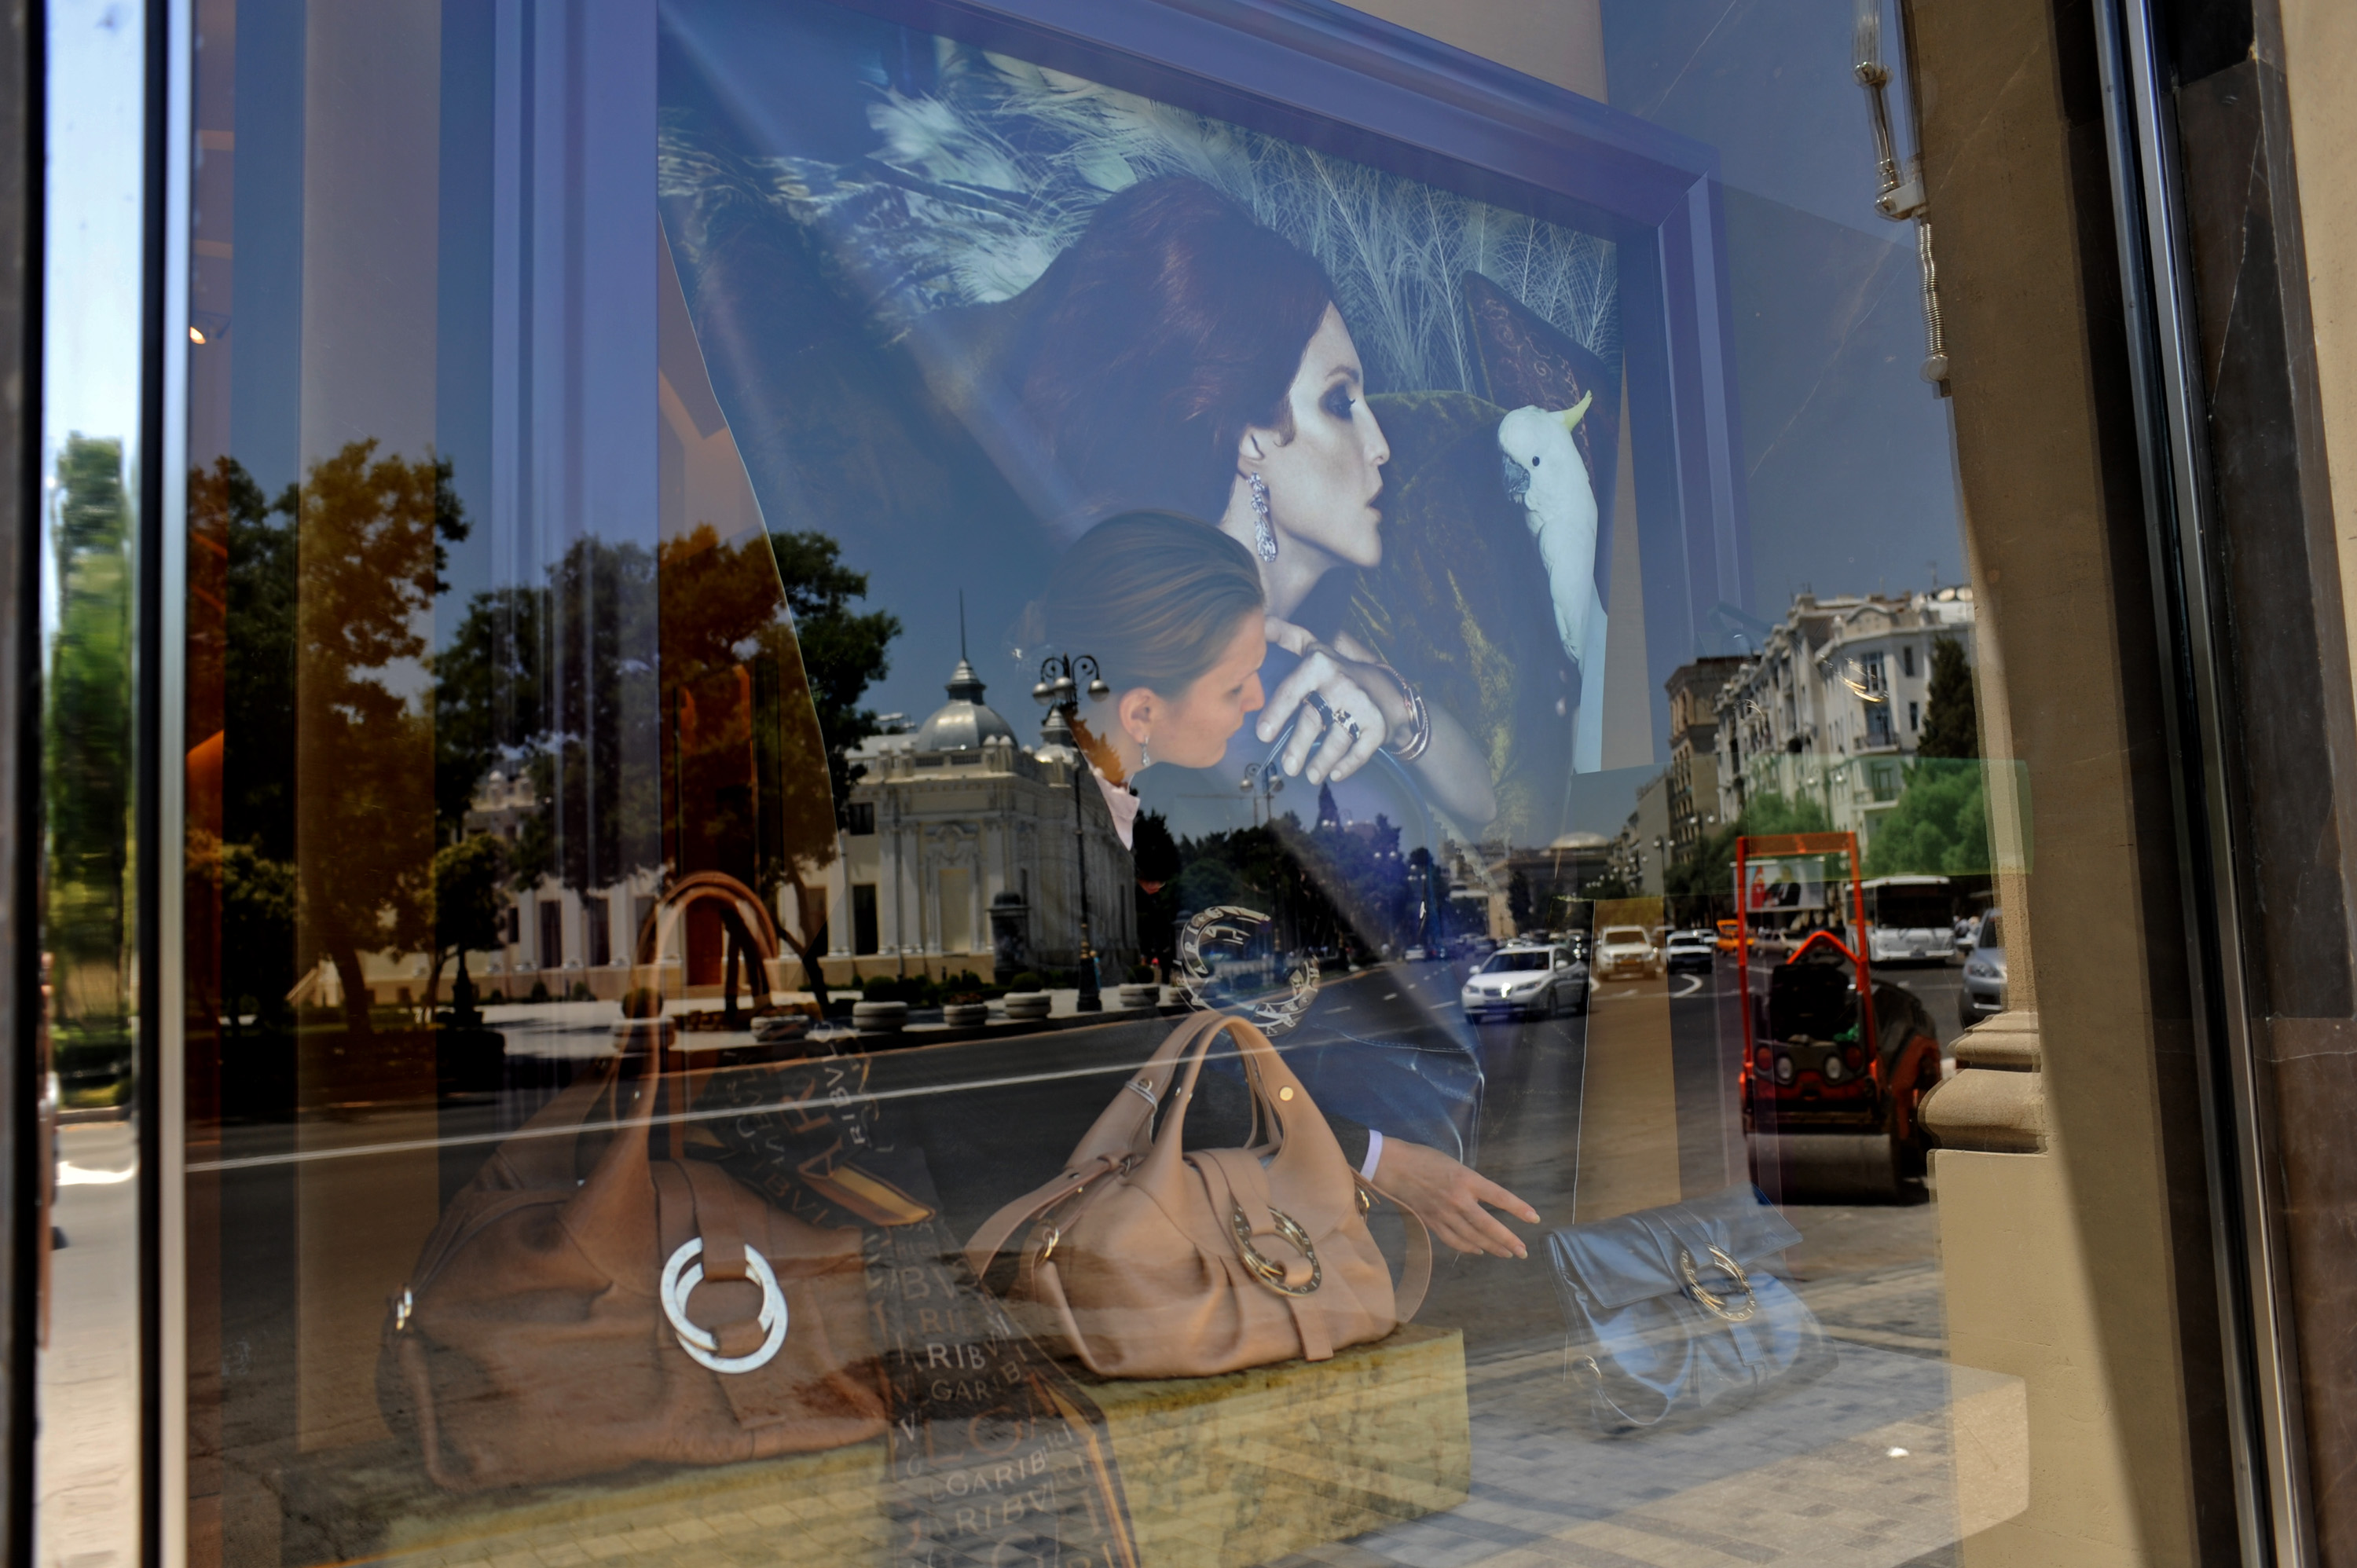 BAKU, AZERBAIJAN.  A saleswoman adjusts the window display at Bulgari on Neftiler Prospekt, or Oil Worker's Boulevard on July 2, 2010.  Luxury shopping in downtown Baku is one symptom of the city within the city or the country within the country where the elite, estimated at 50,000, control much of the country's income and profit from oil revenues, leaving a wide gap in the absence of a middle class between them and the rest of the country.